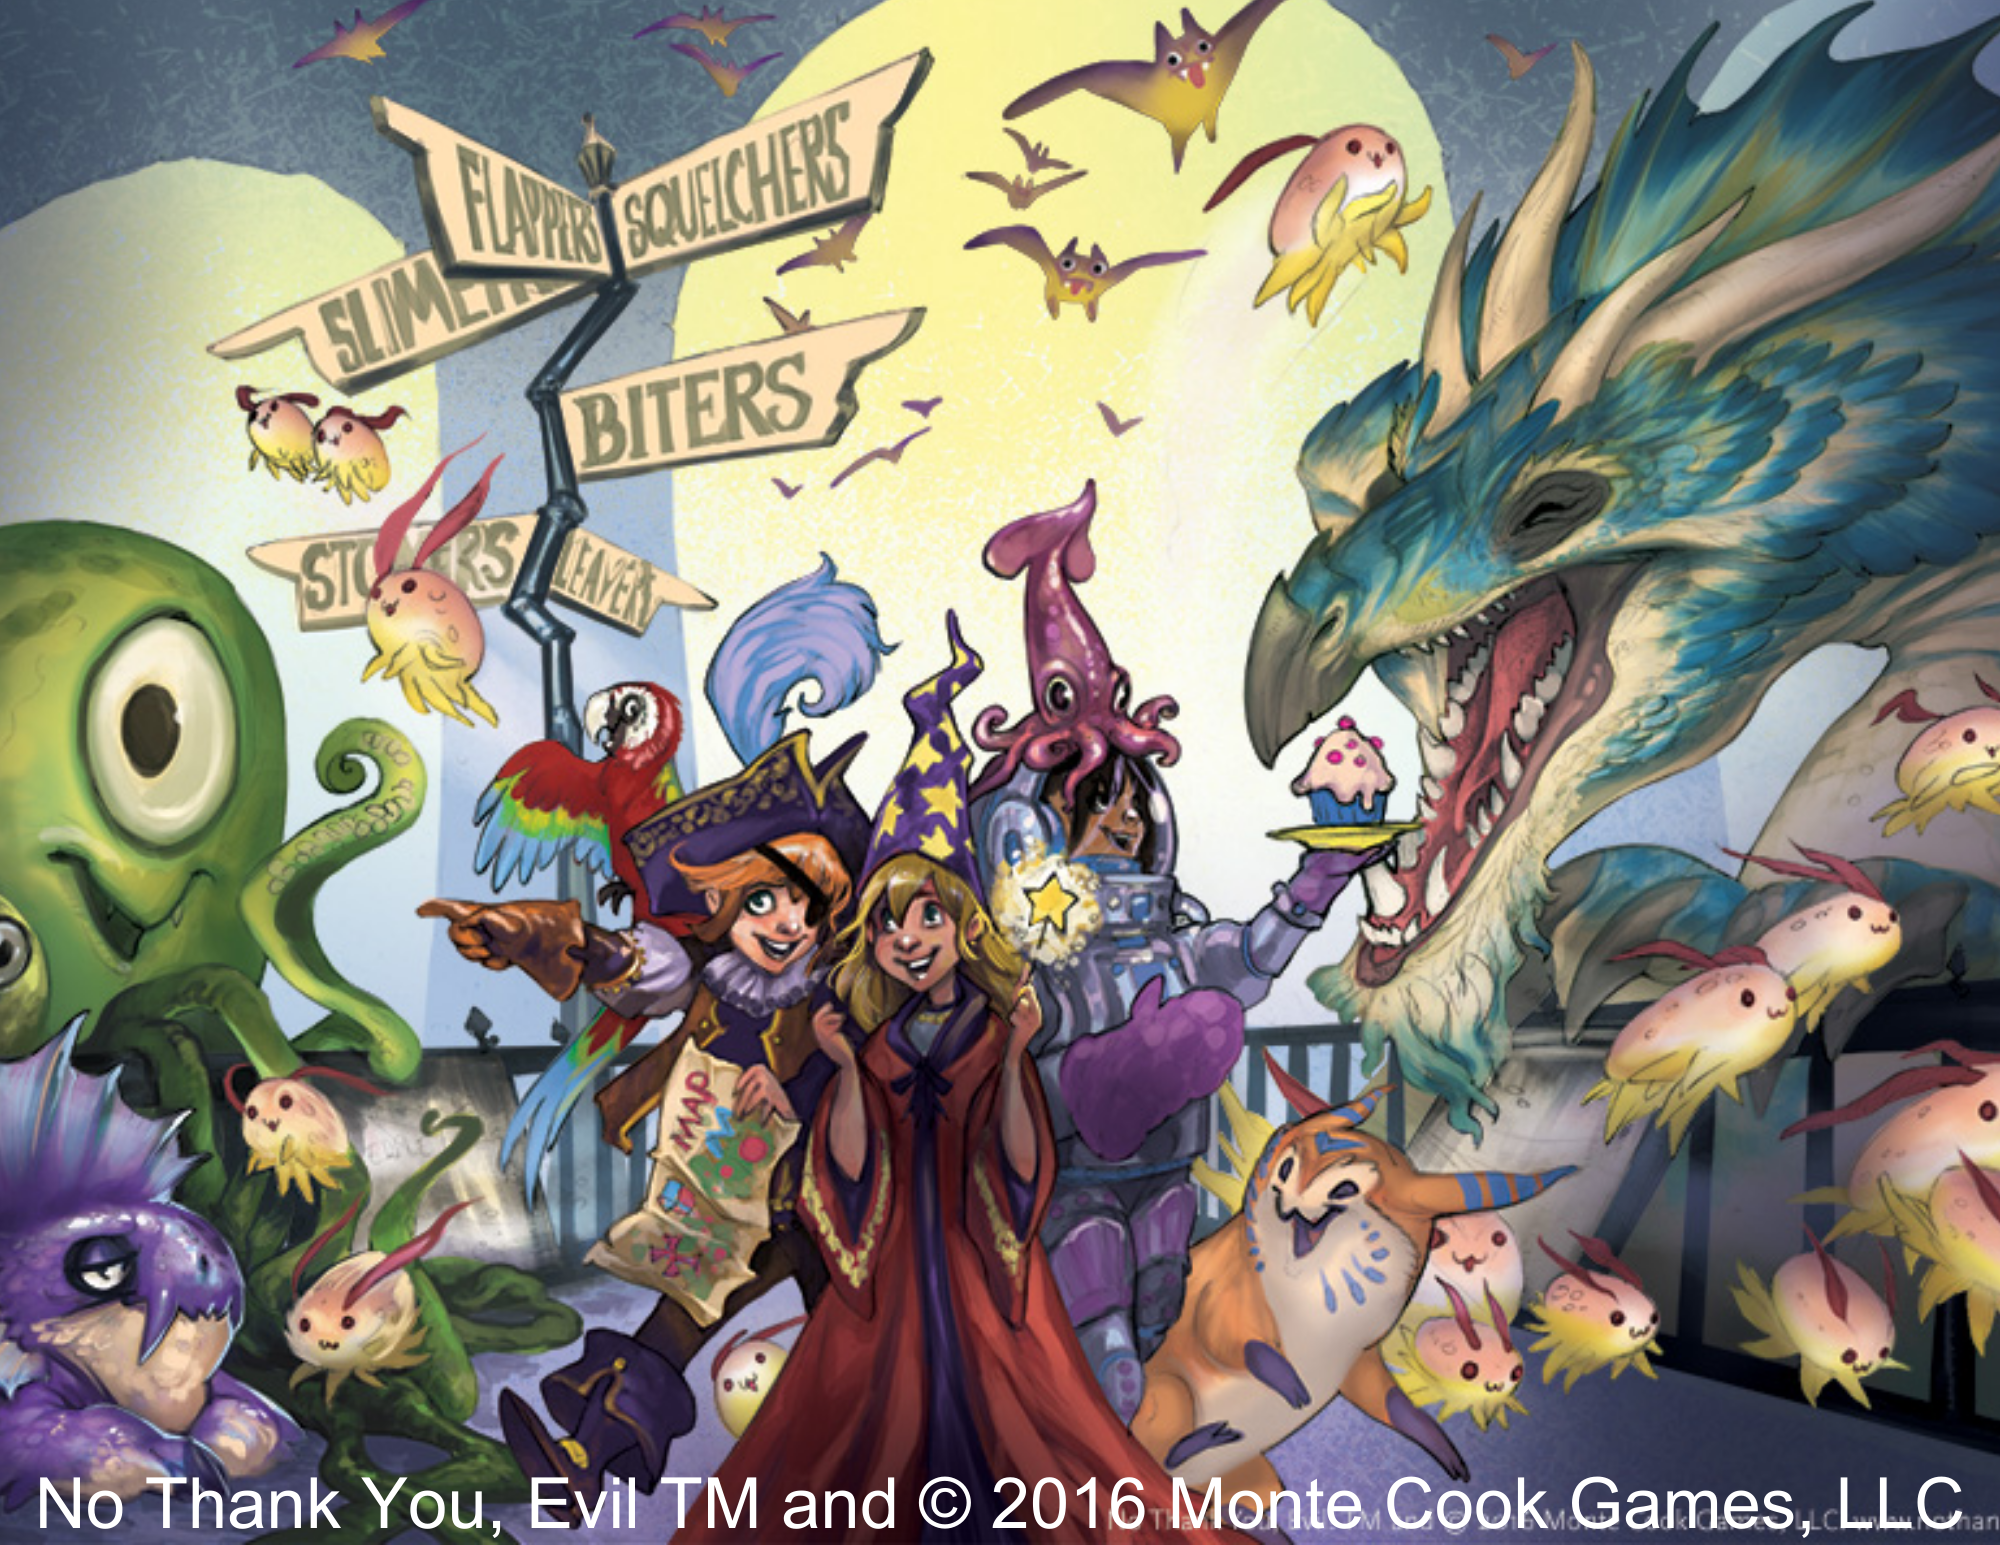 A group of children dressed as a wizard, pirate, and astronaut enter a building filled with diverse magical creatures, including a blob cyclops, a feathered dragon, and small frog/rabbit creatures